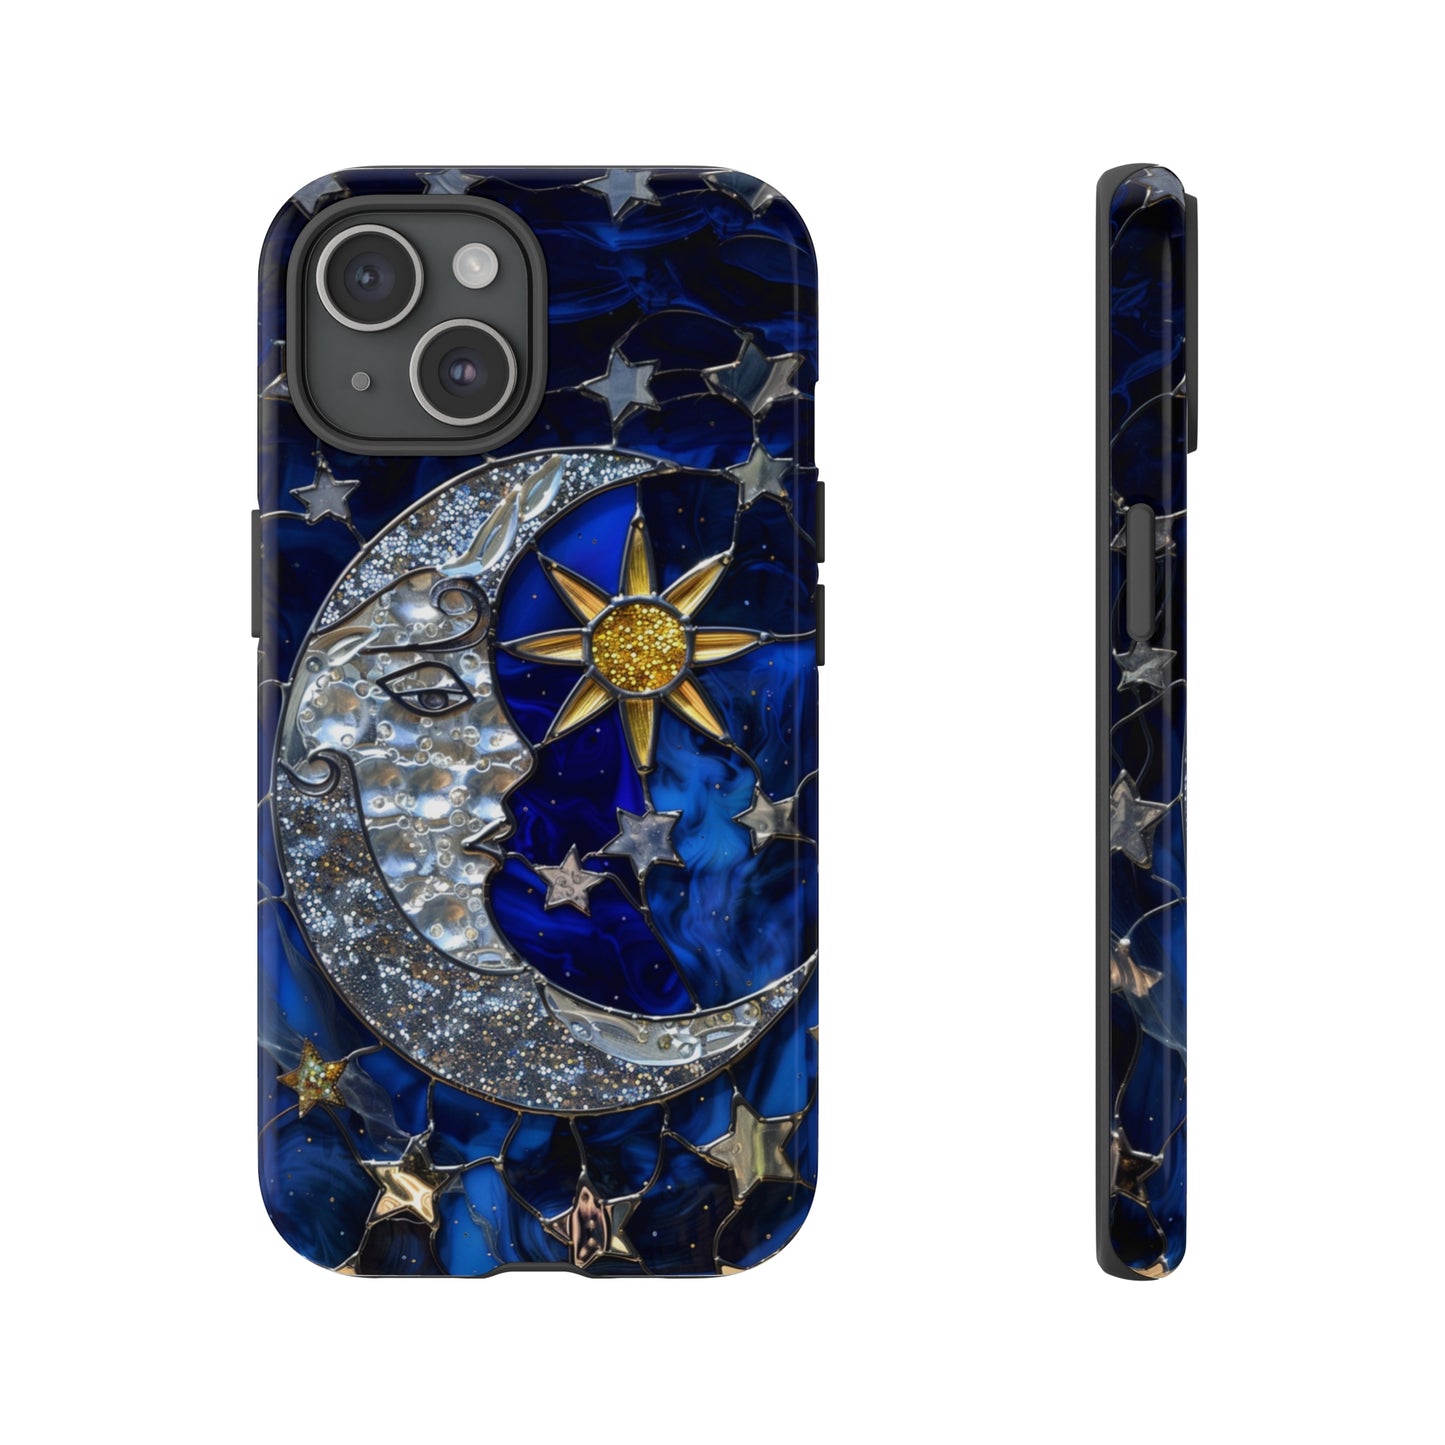 Cosmic Stained Glass Phone Case